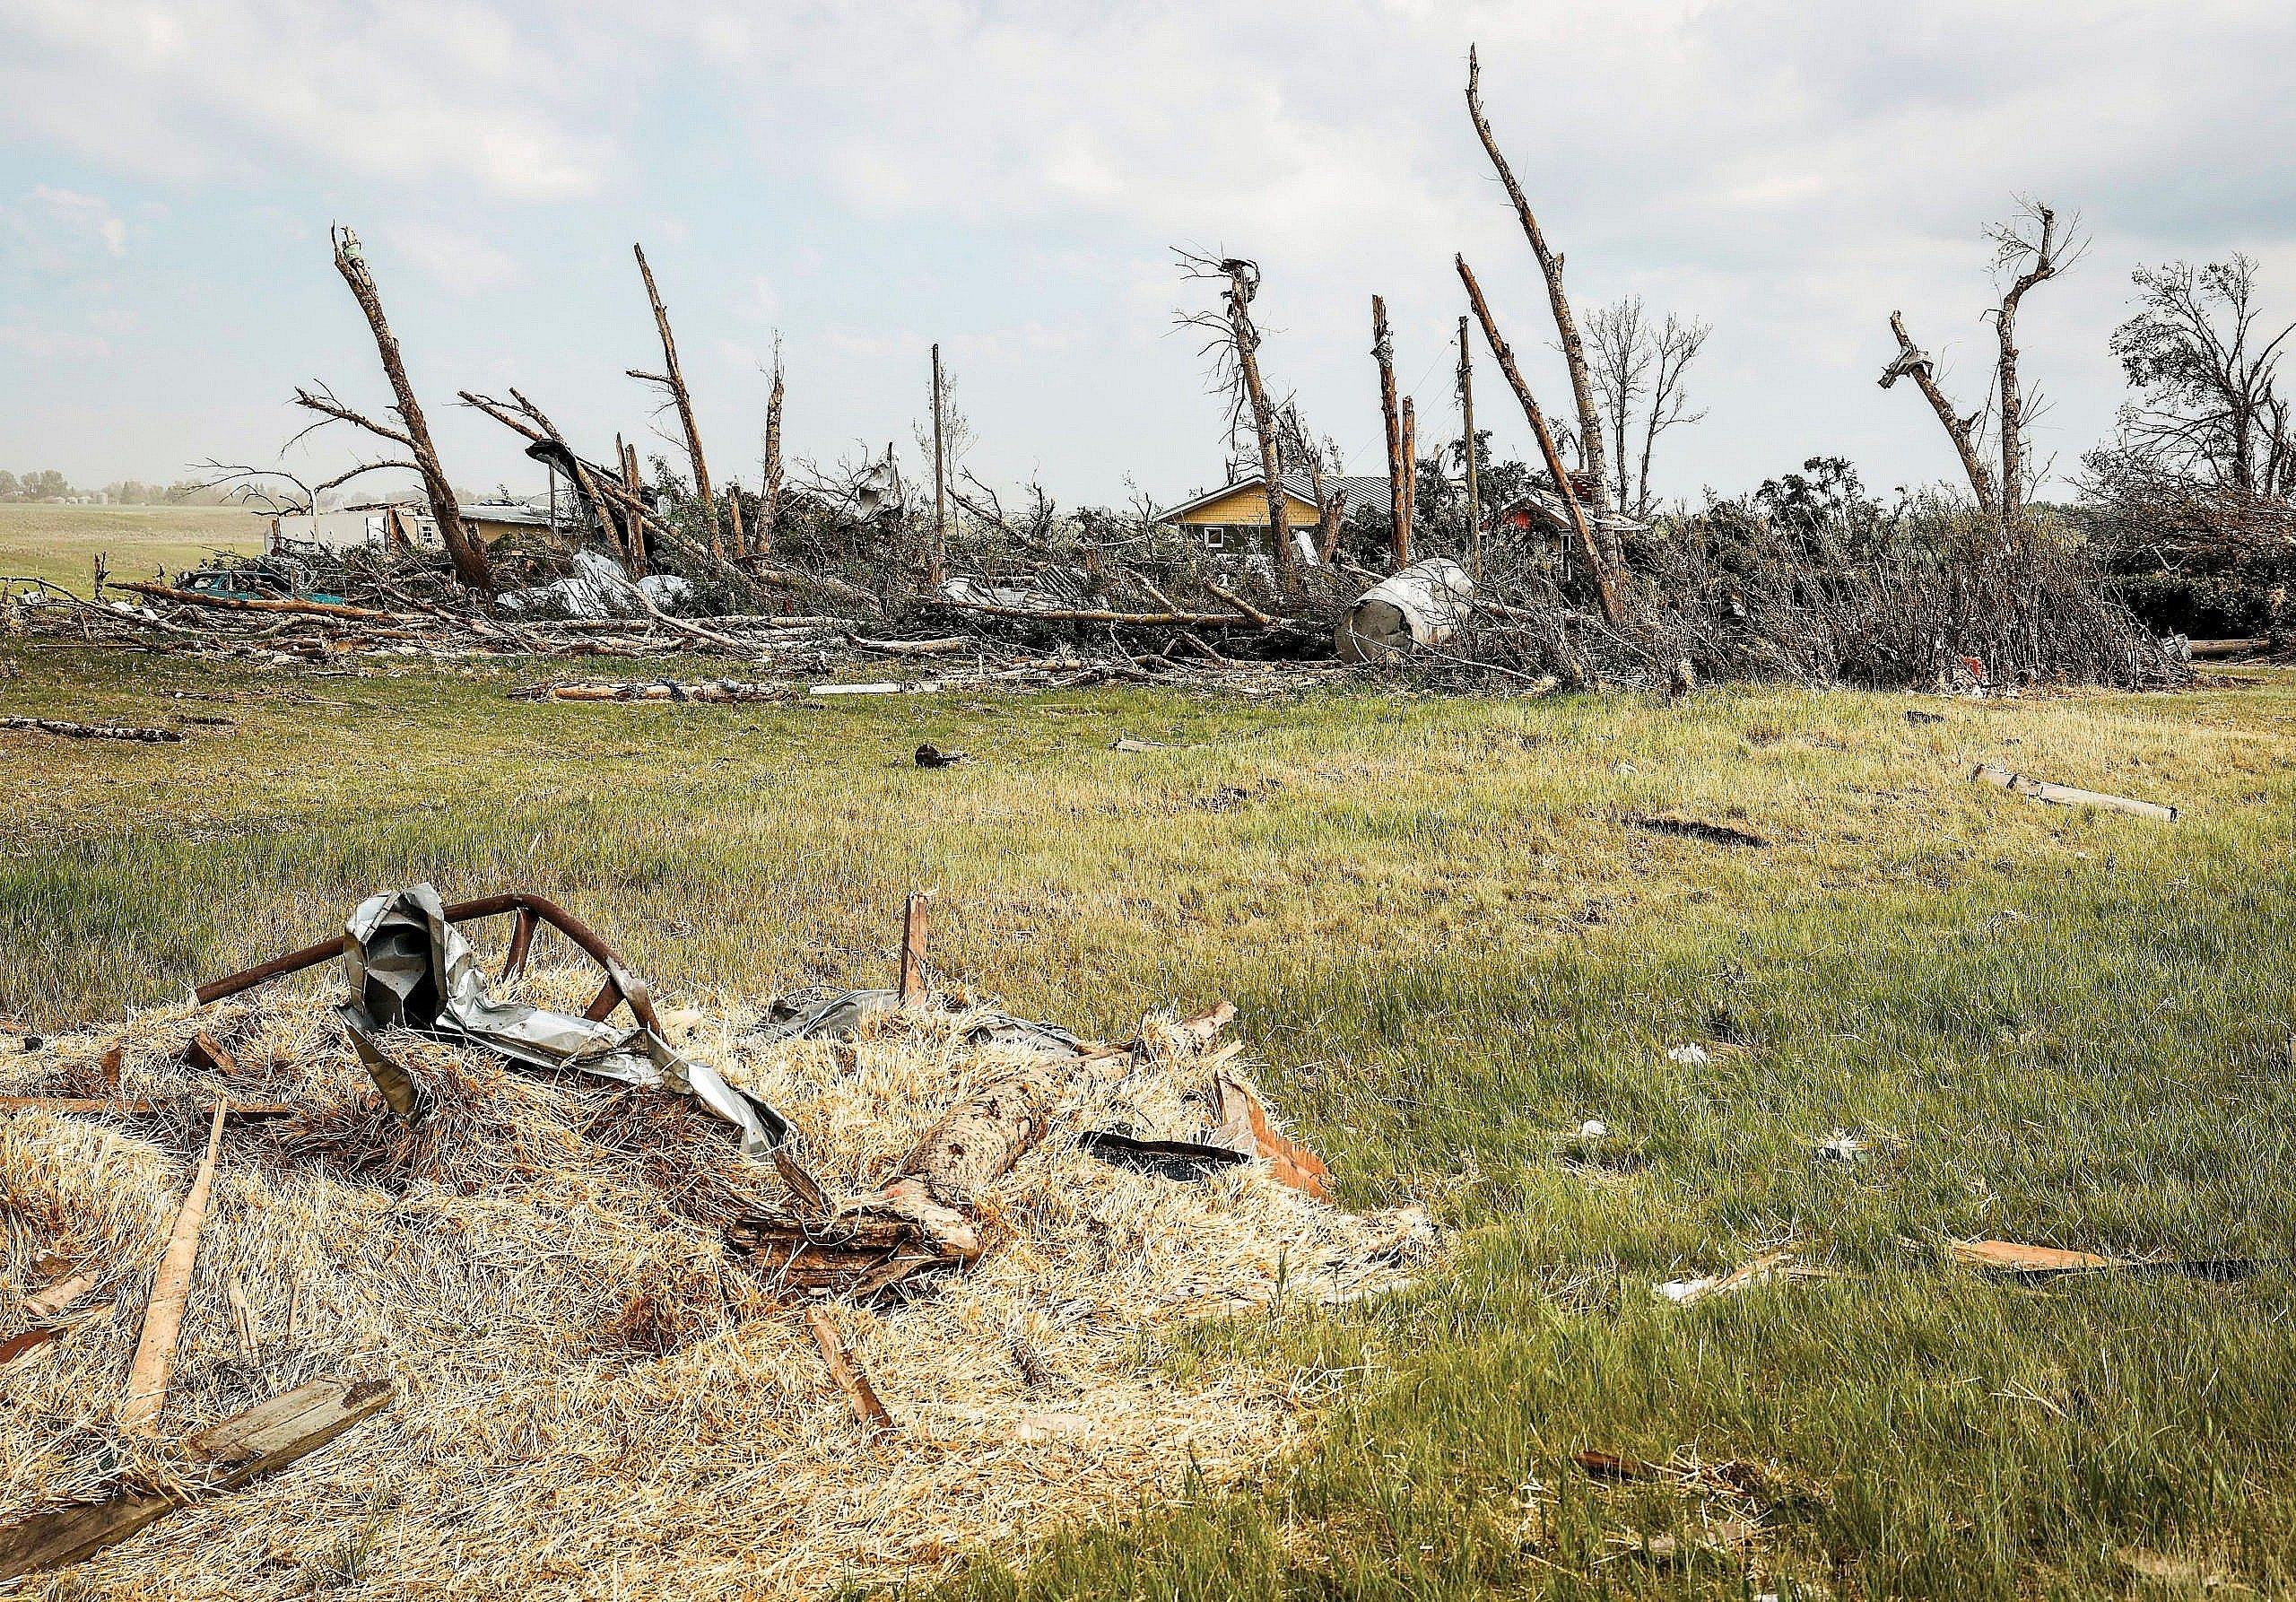 Alberta: One of the strongest tornadoes in the province's history tore a path between the towns of Didsbury and Carstairs in July 2023.Â In 2060, the Canadian Climate Institute projects that Alberta will be especially hard hit by extreme weather caused by climate change, including tornadoes, torrential rain and hail, droughts, floods and fires.